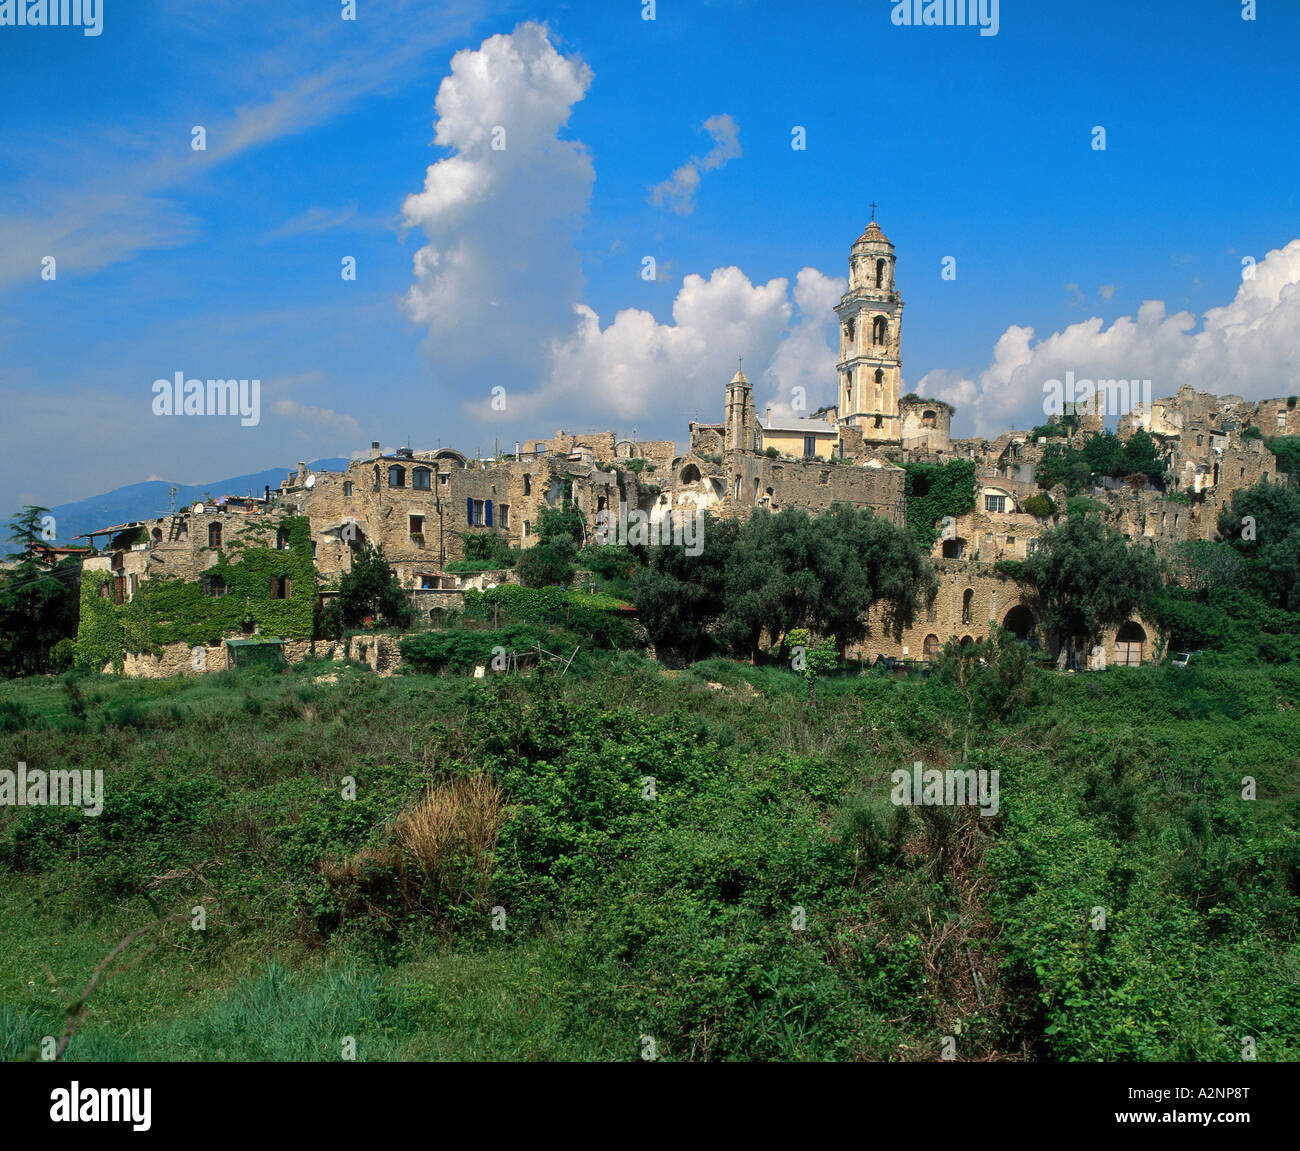 Old ruins of an abandoned town, Bussana Vecchia, Liguria, Italy Stock Photo